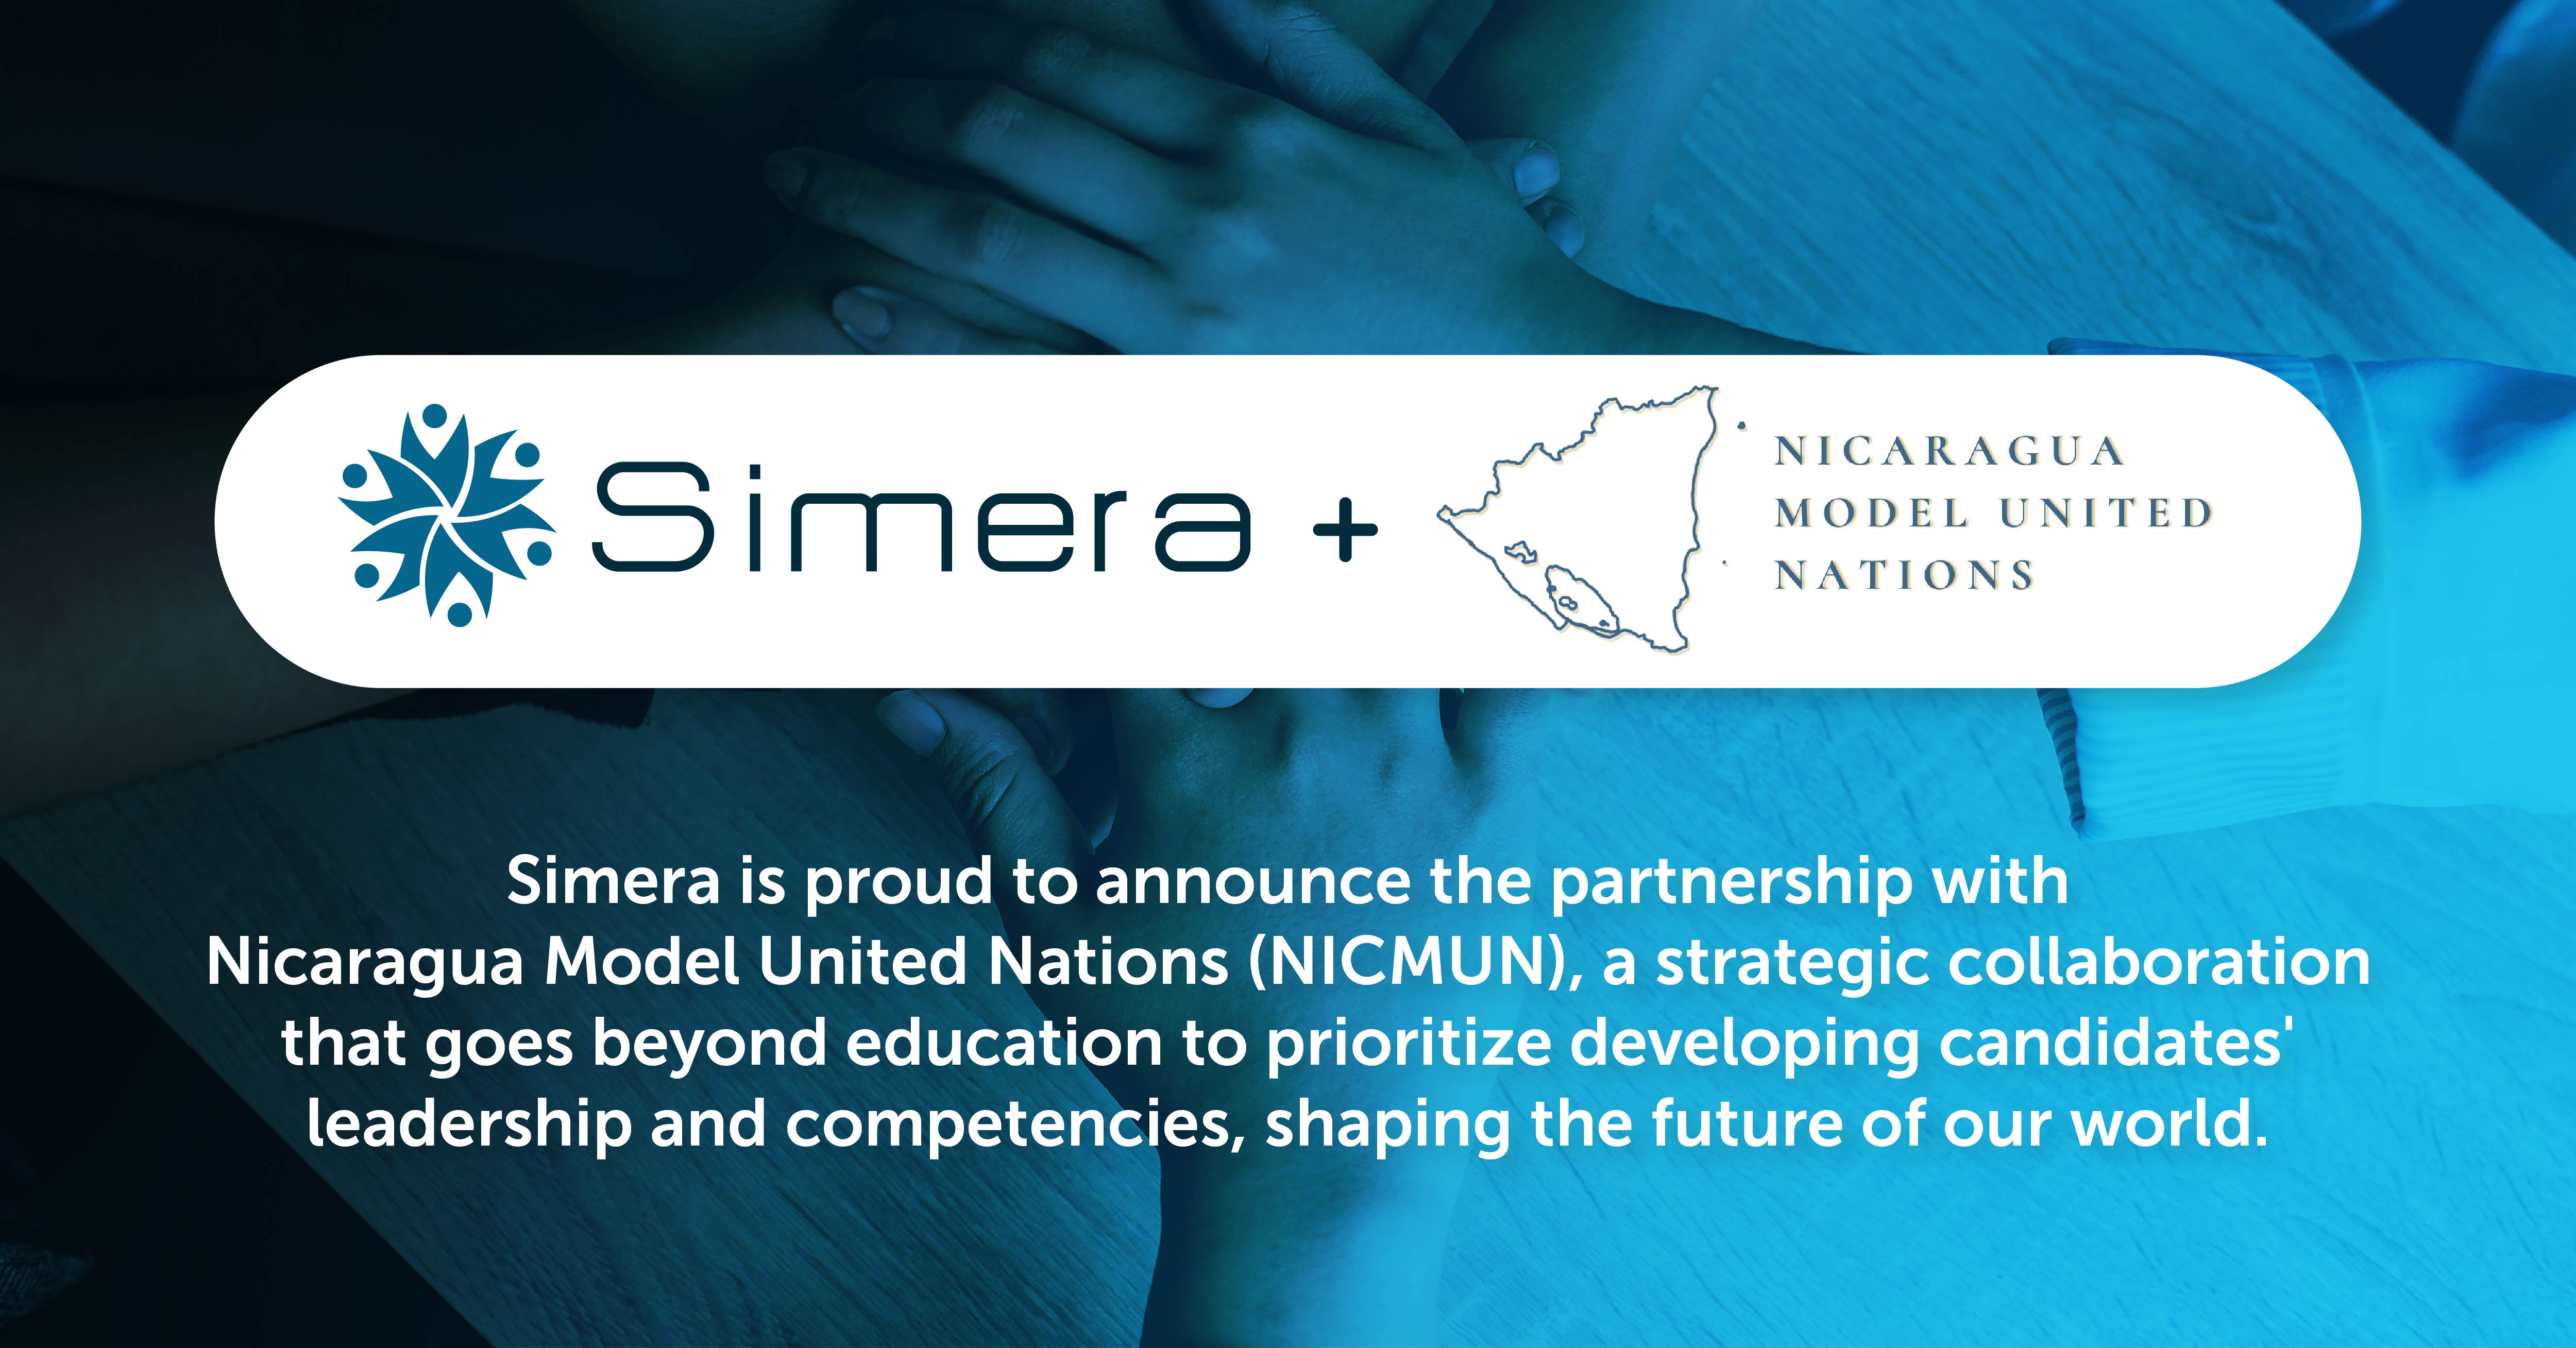 Beyond Boundaries: Simera connects you with the Best Leaders